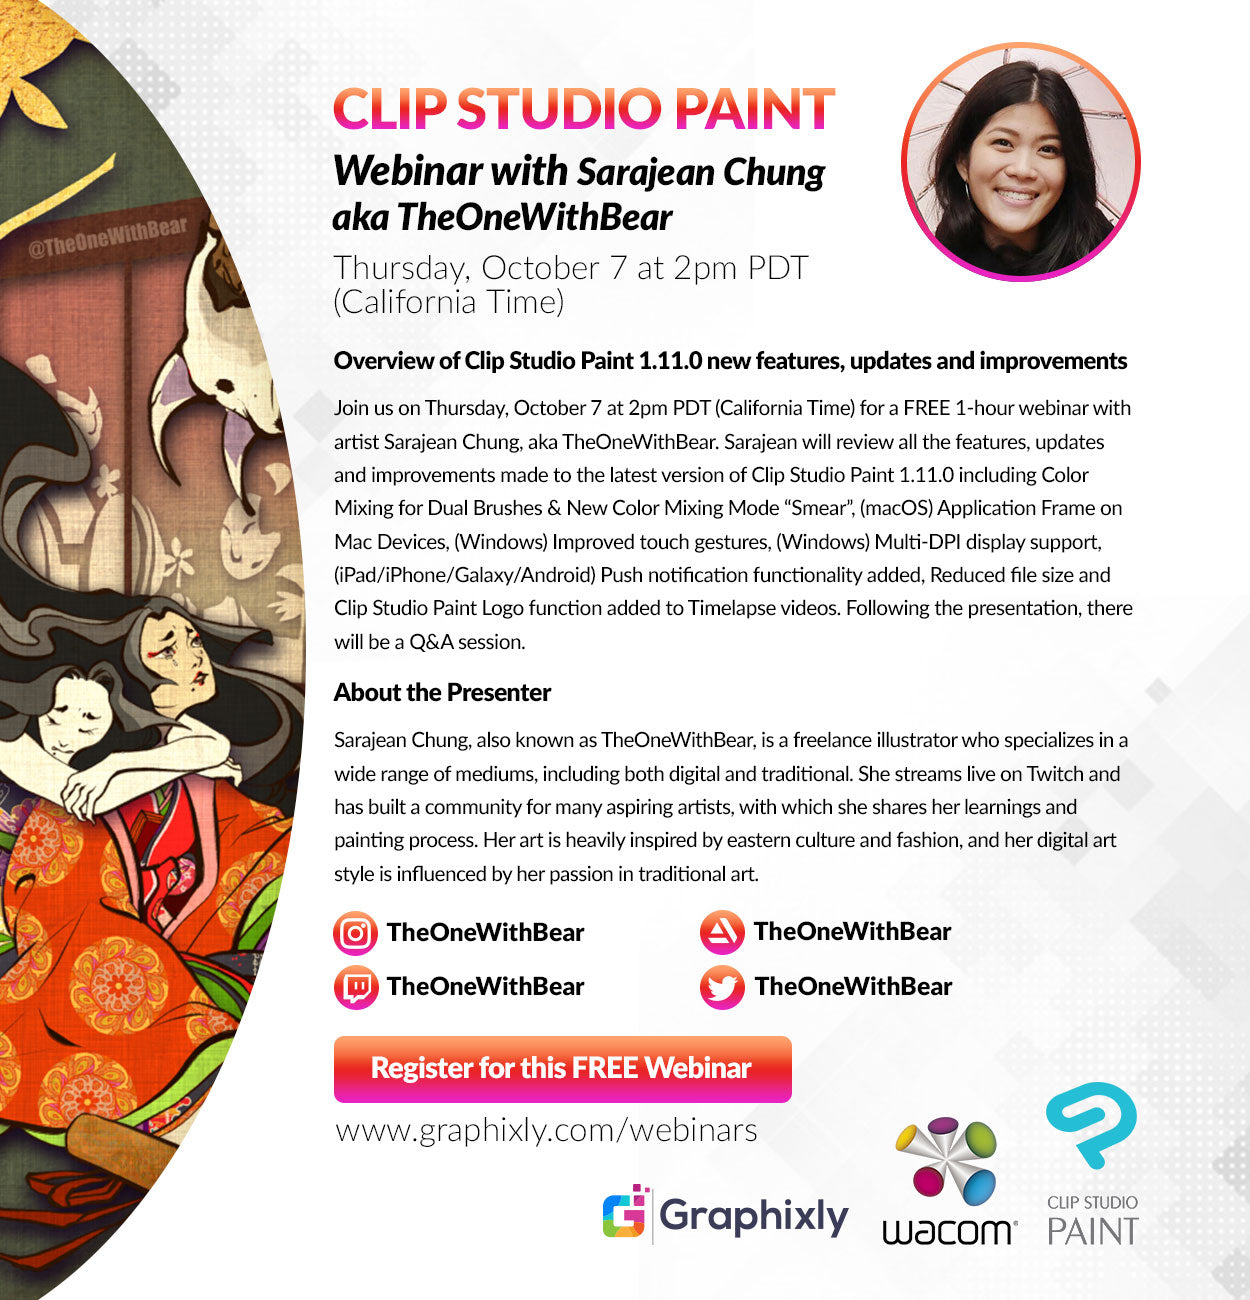 Webinar – Overview of Clip Studio Paint 1.11.1 new features, updates and improvements with Sarajean Chung